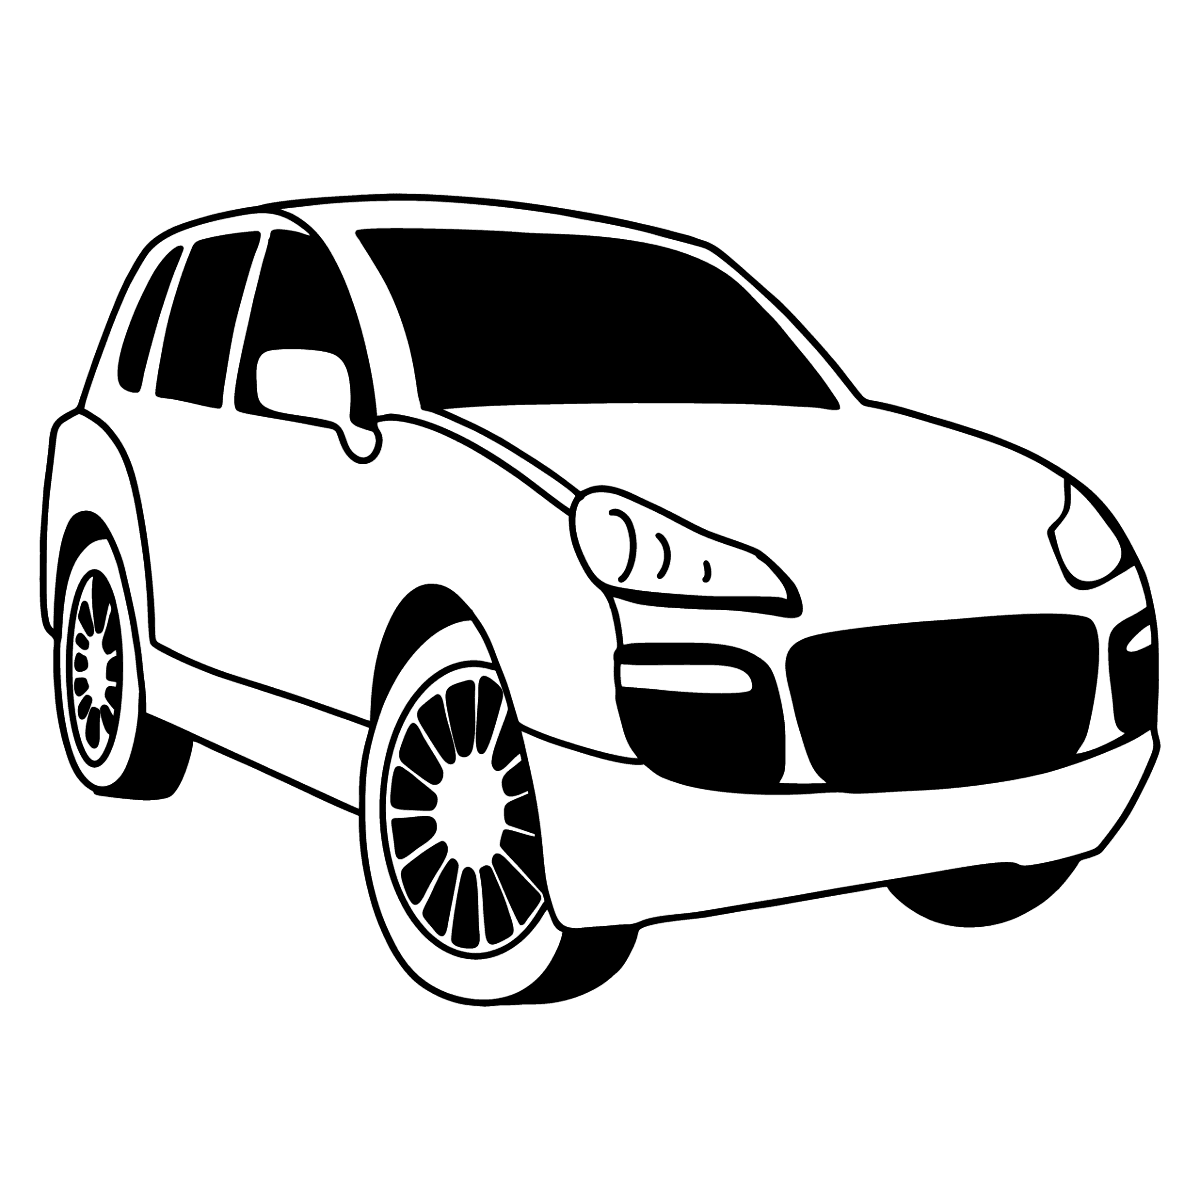 Porsche Cayenne Crossover coloring page Print, and Online!